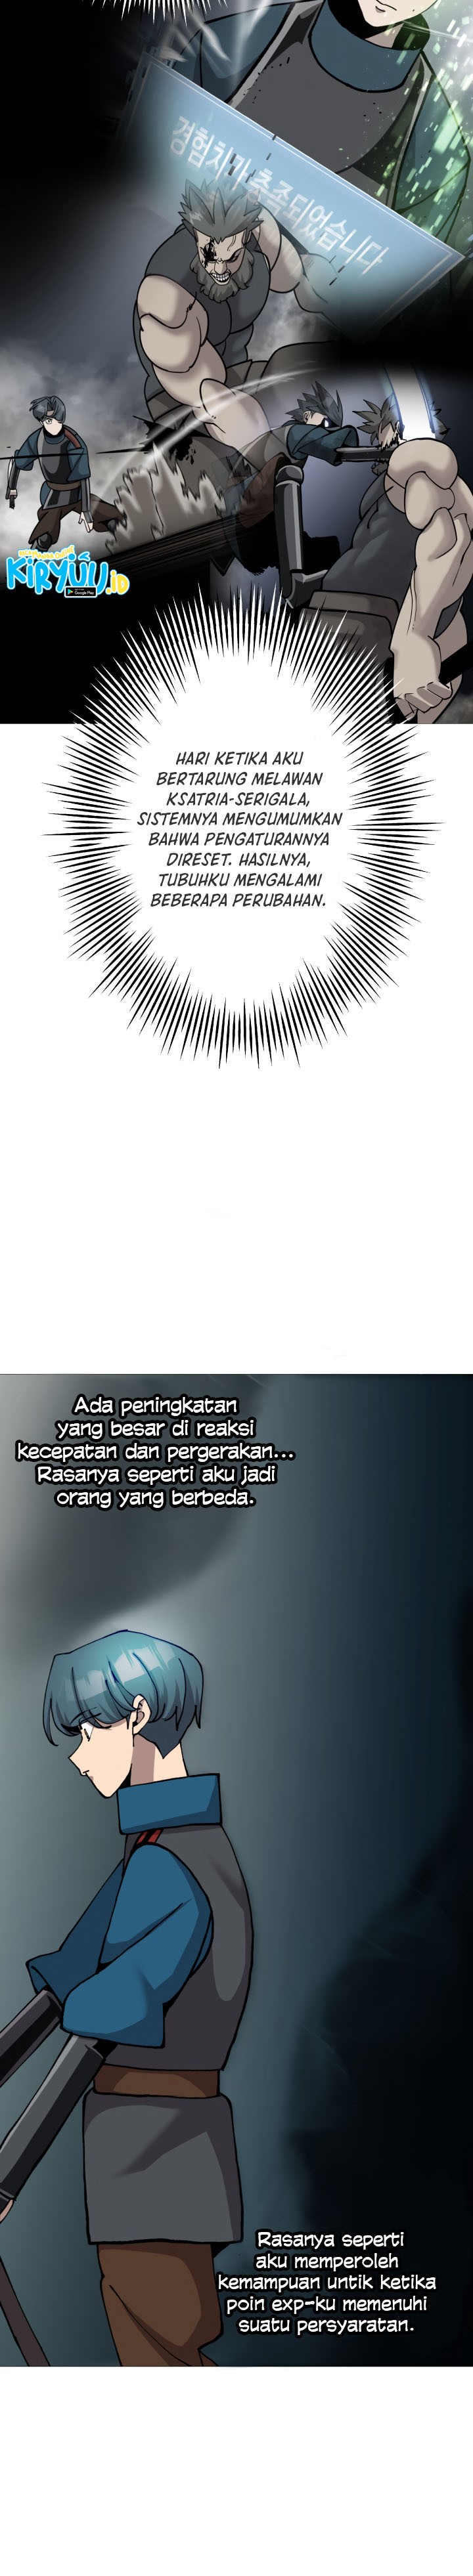 Dilarang COPAS - situs resmi www.mangacanblog.com - Komik the story of a low rank soldier becoming a monarch 018 - chapter 18 19 Indonesia the story of a low rank soldier becoming a monarch 018 - chapter 18 Terbaru 17|Baca Manga Komik Indonesia|Mangacan